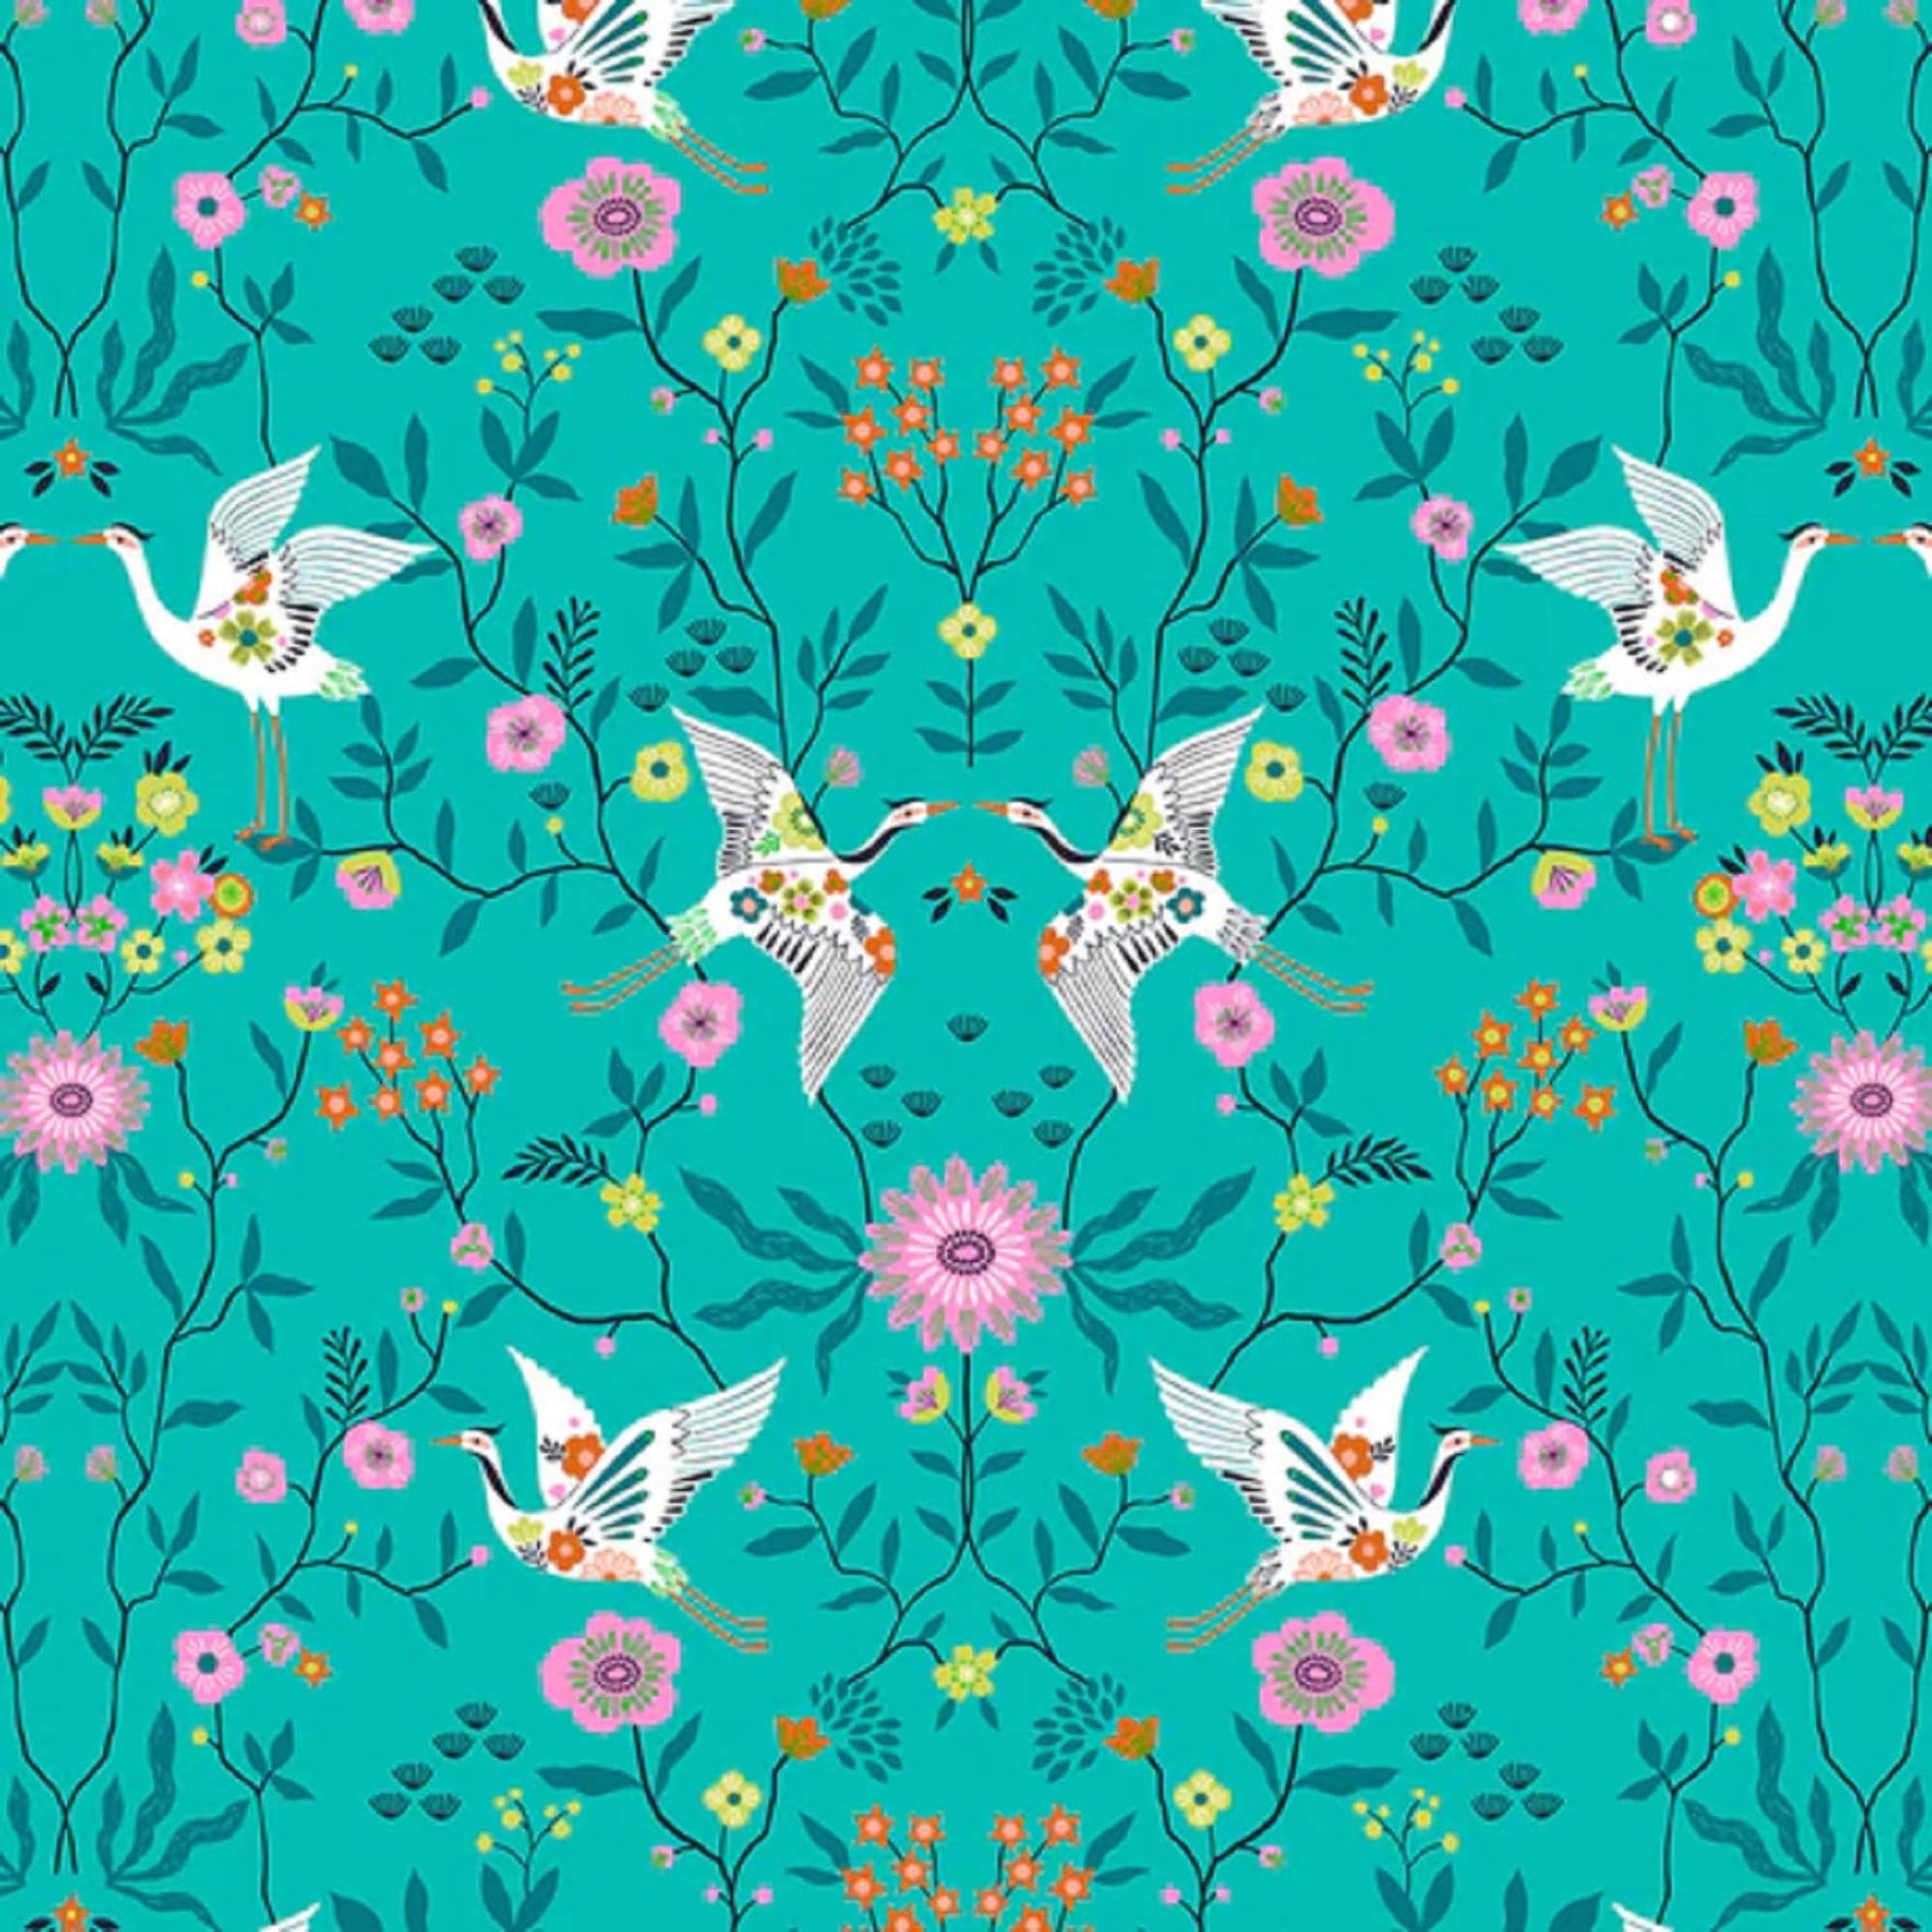 Mirrored Cranes Turquoise Blossom Days Bethan Janine Dashwood Studio Quilters Cotton Fabric Fetish